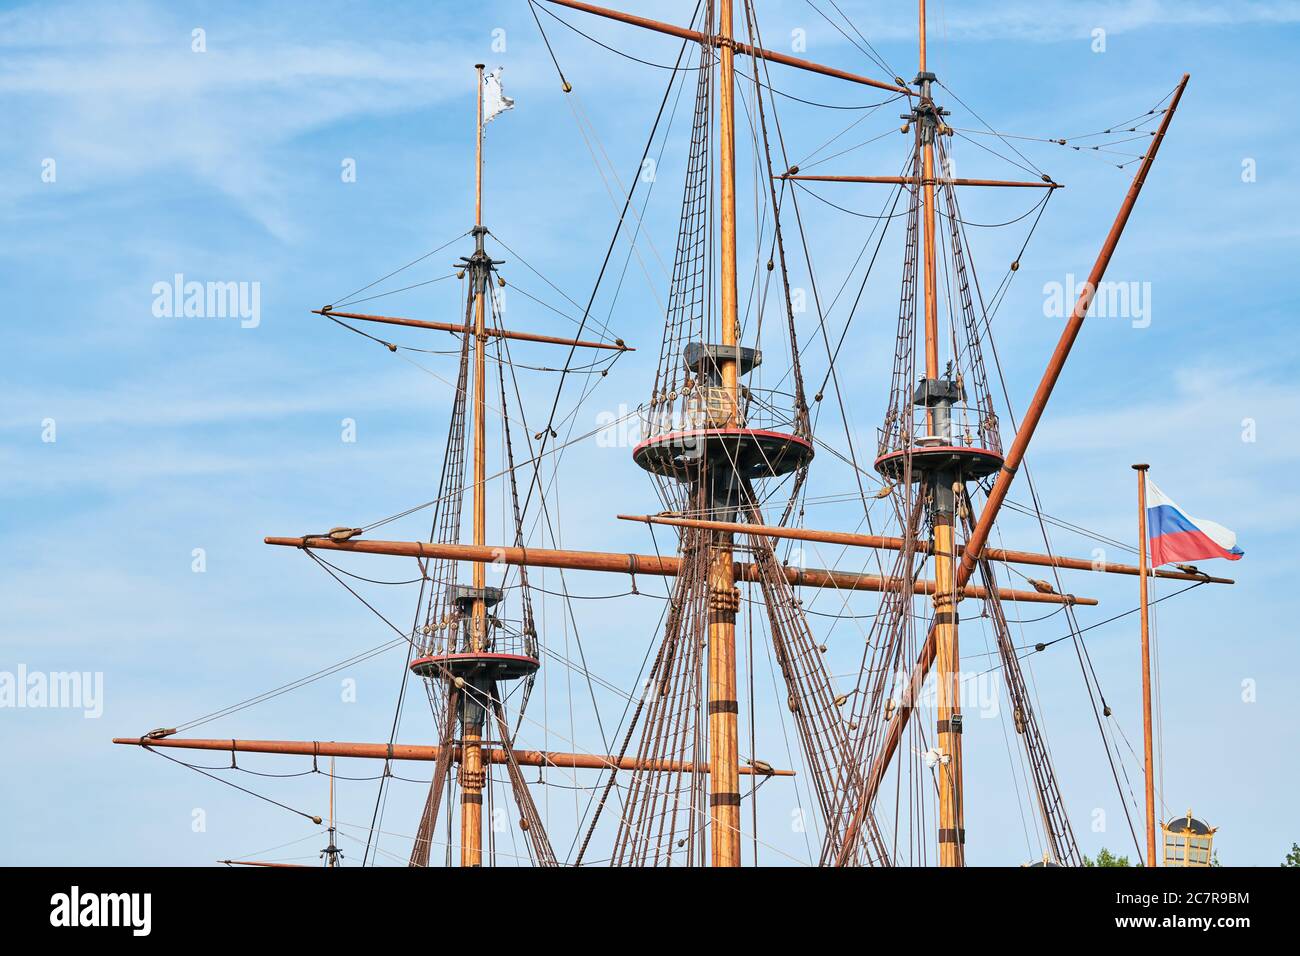 Sailing mast of ship. Sailing vessel main topgallant mast with crows nest.  Old frigate warship Stock Photo - Alamy